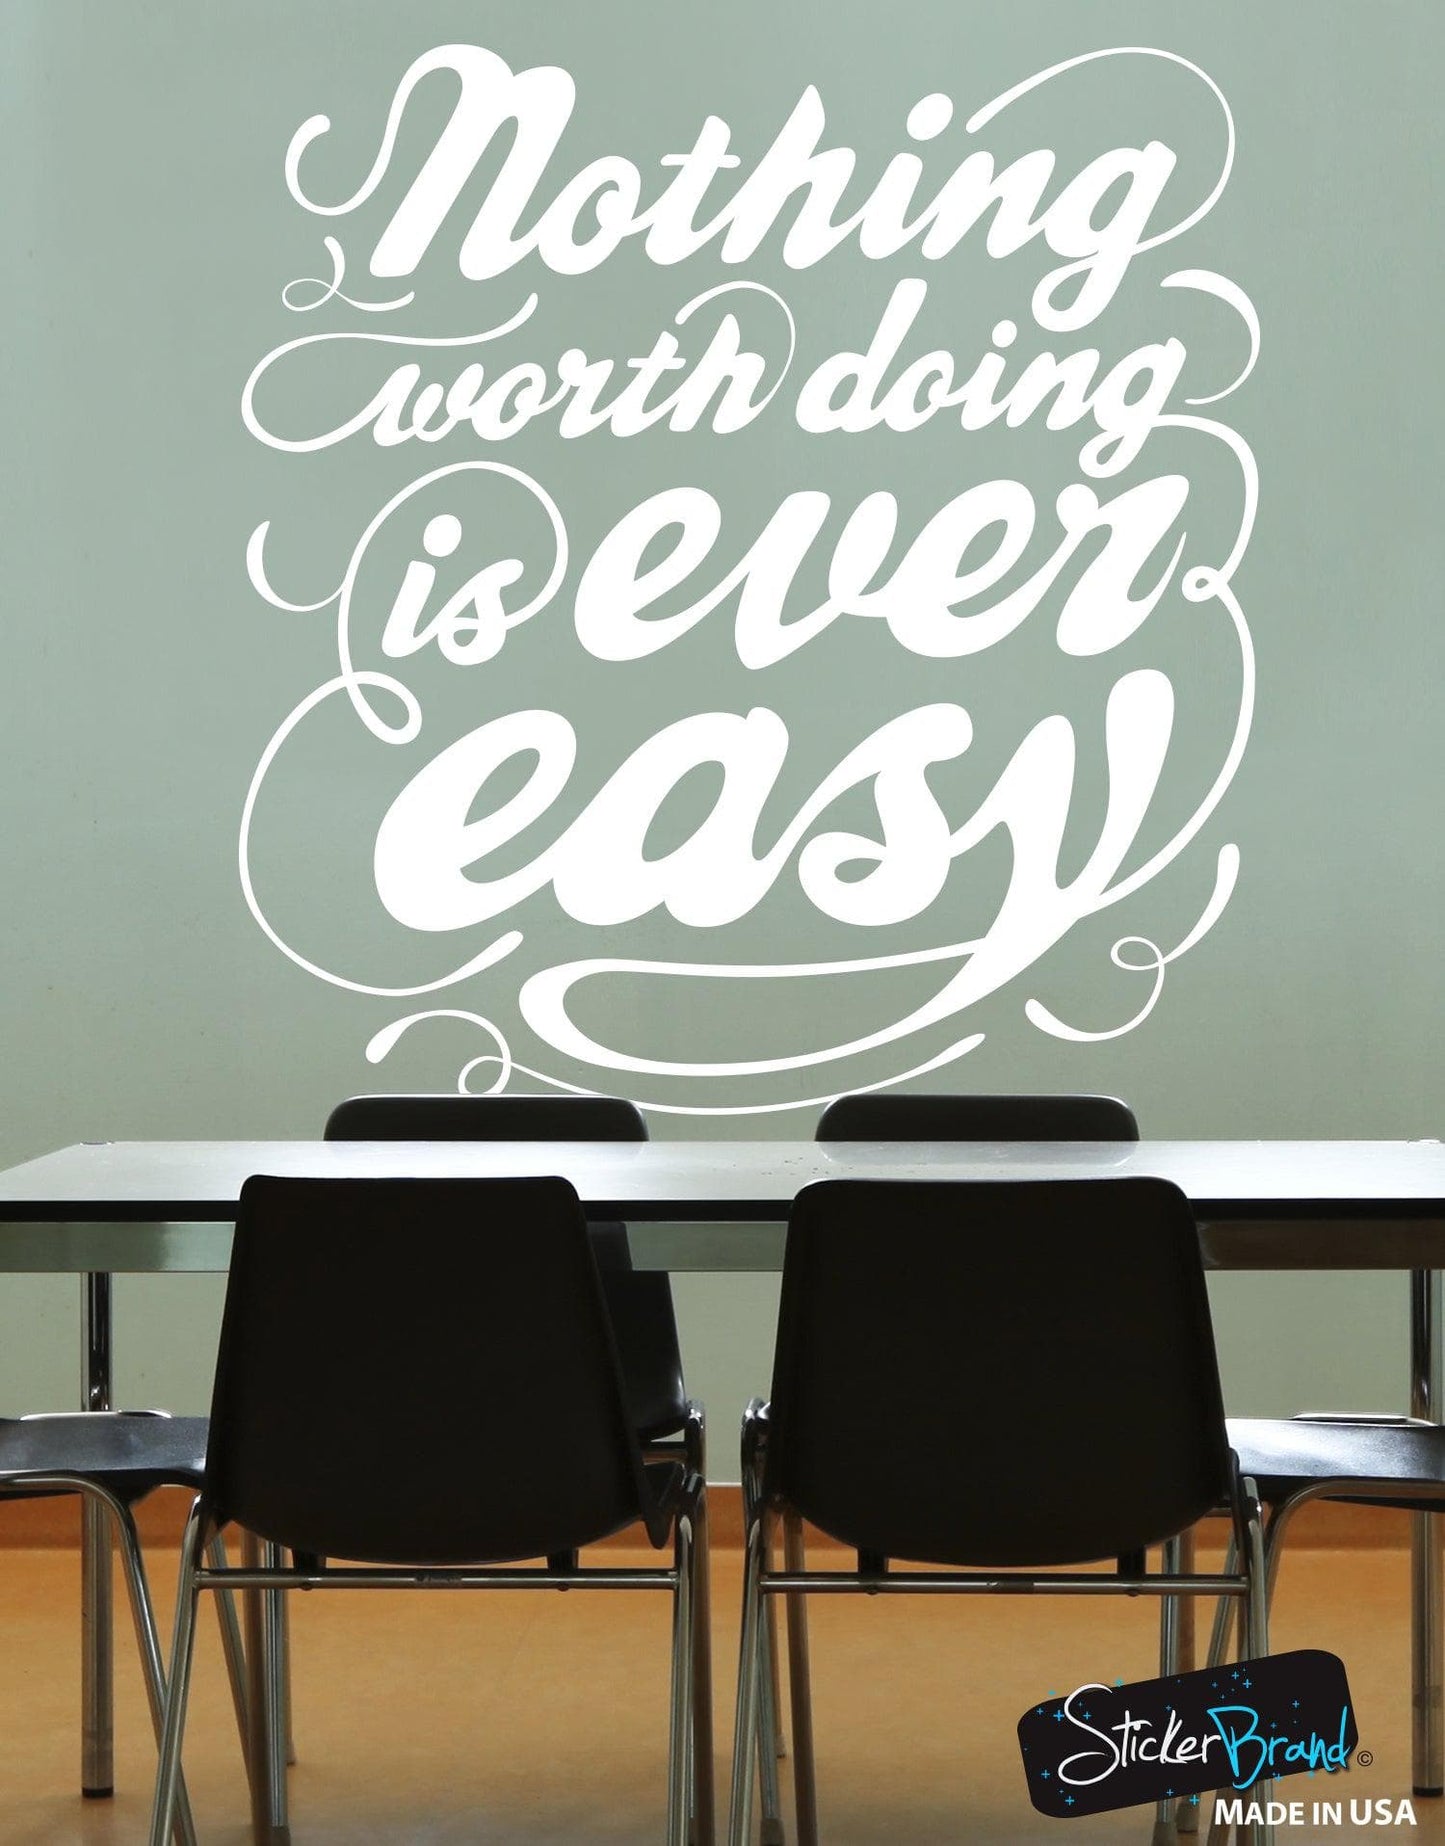 Nothing Worth Doing is Ever Easy Motivational Quote Wall Decal Sticker #6103